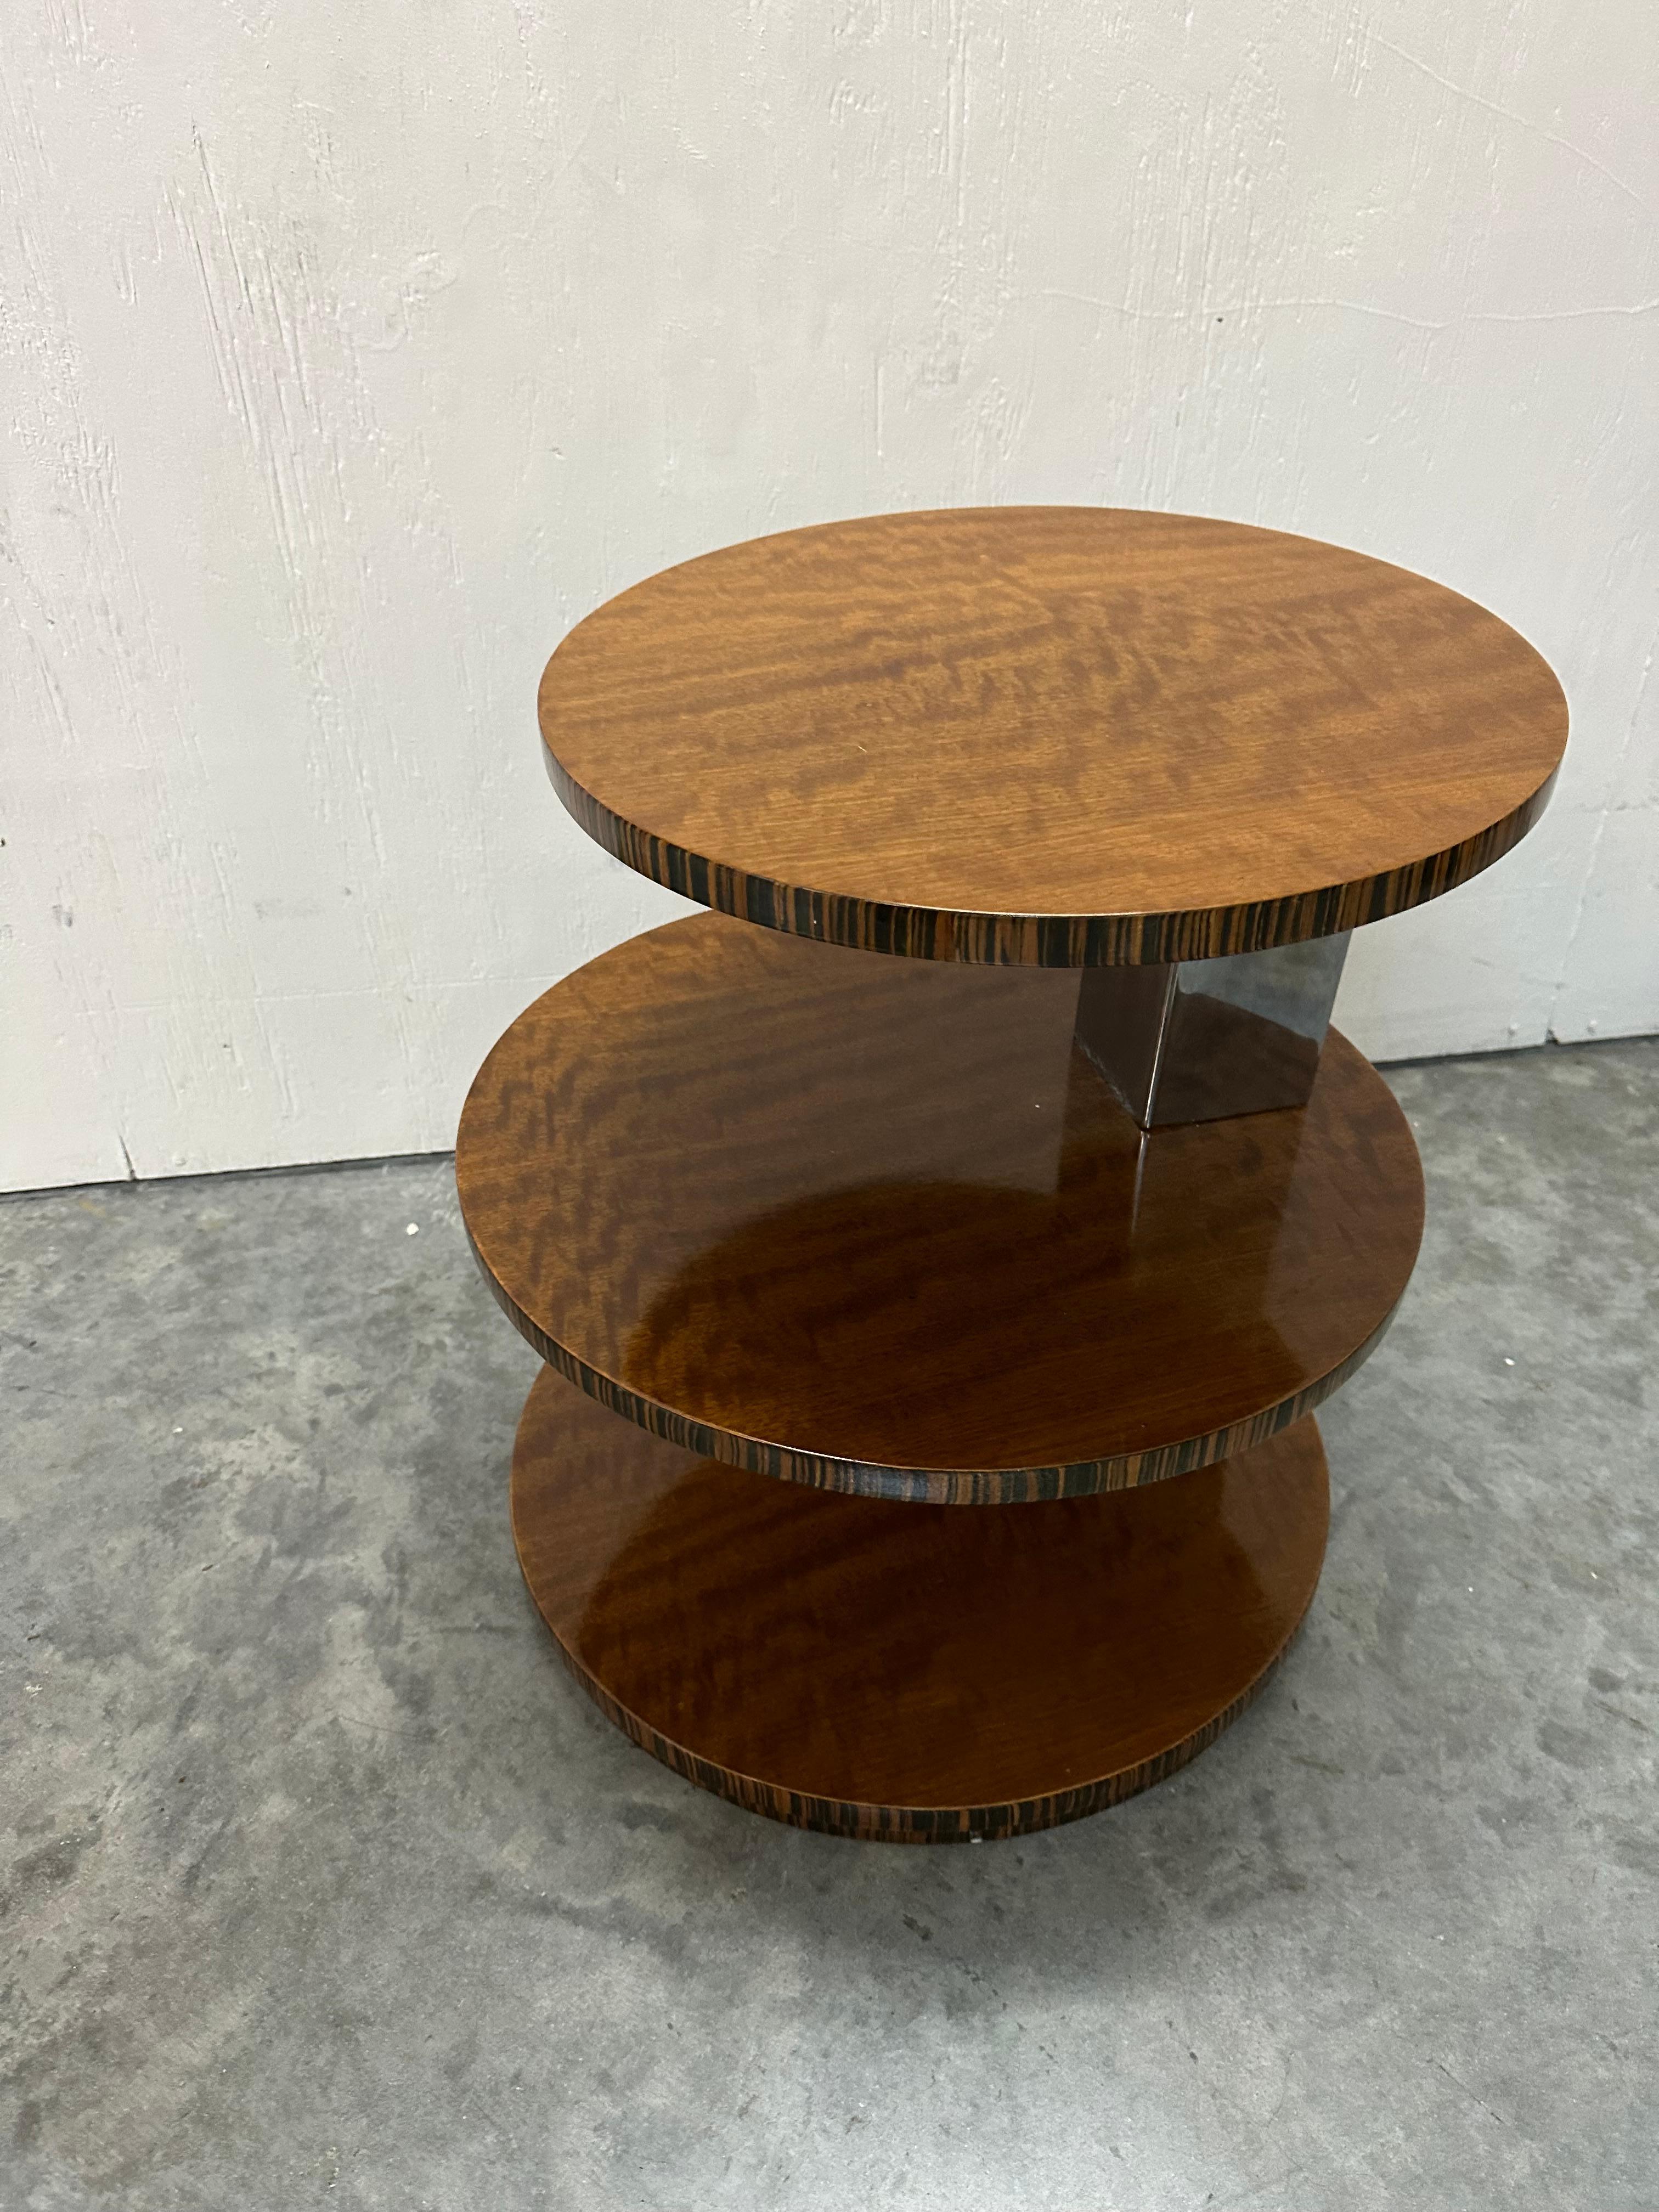 Three Tier Table 'Attributed to the Bauhaus' German For Sale 14